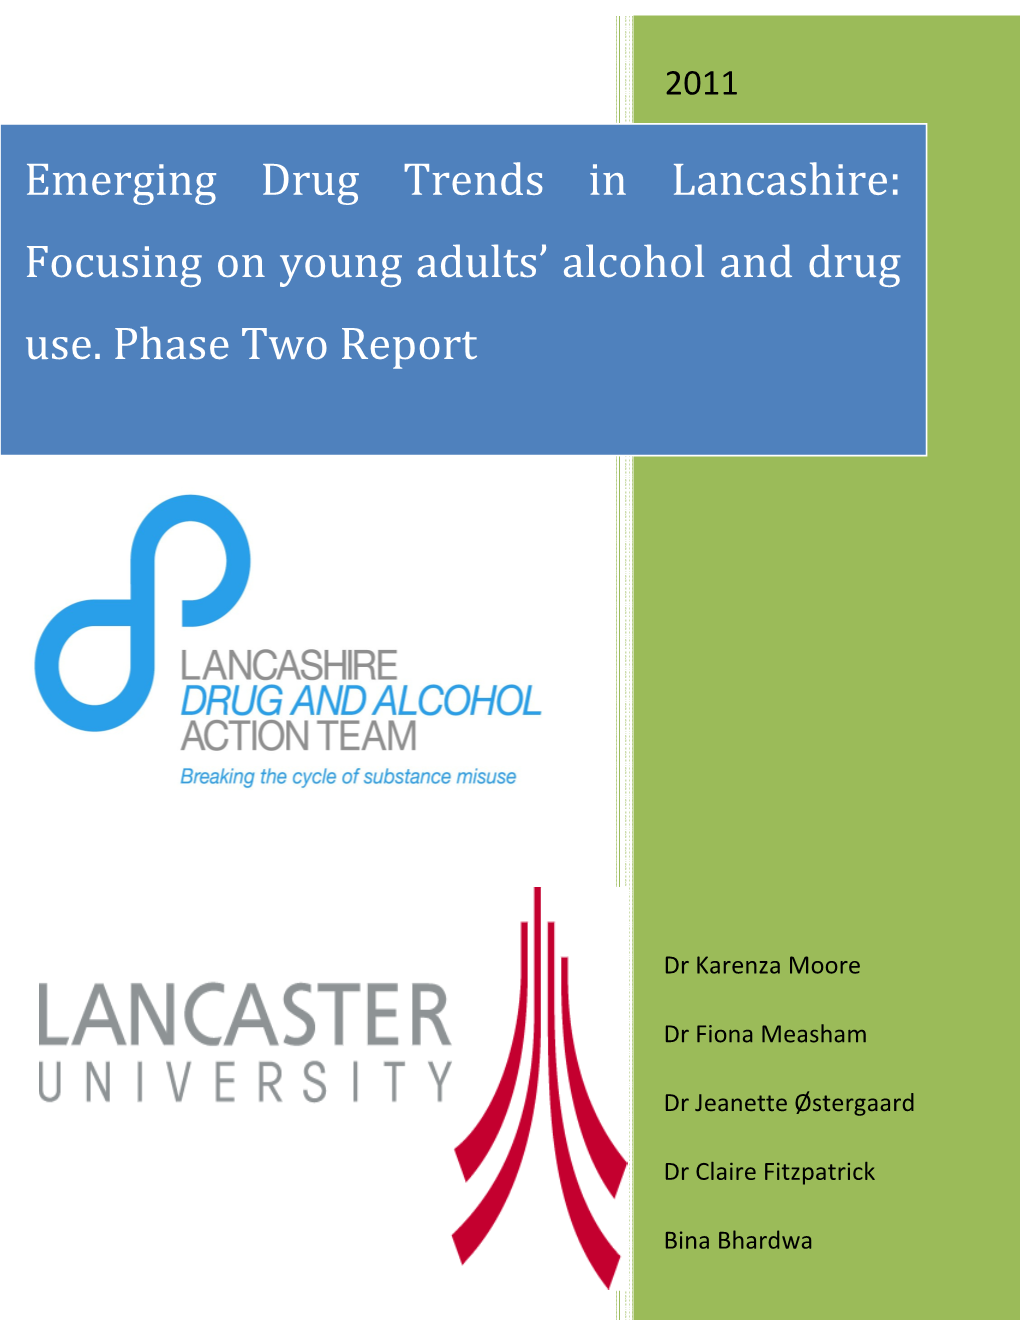 Focusing on Young Adults' Alcohol and Drug Use. Phase Two Report